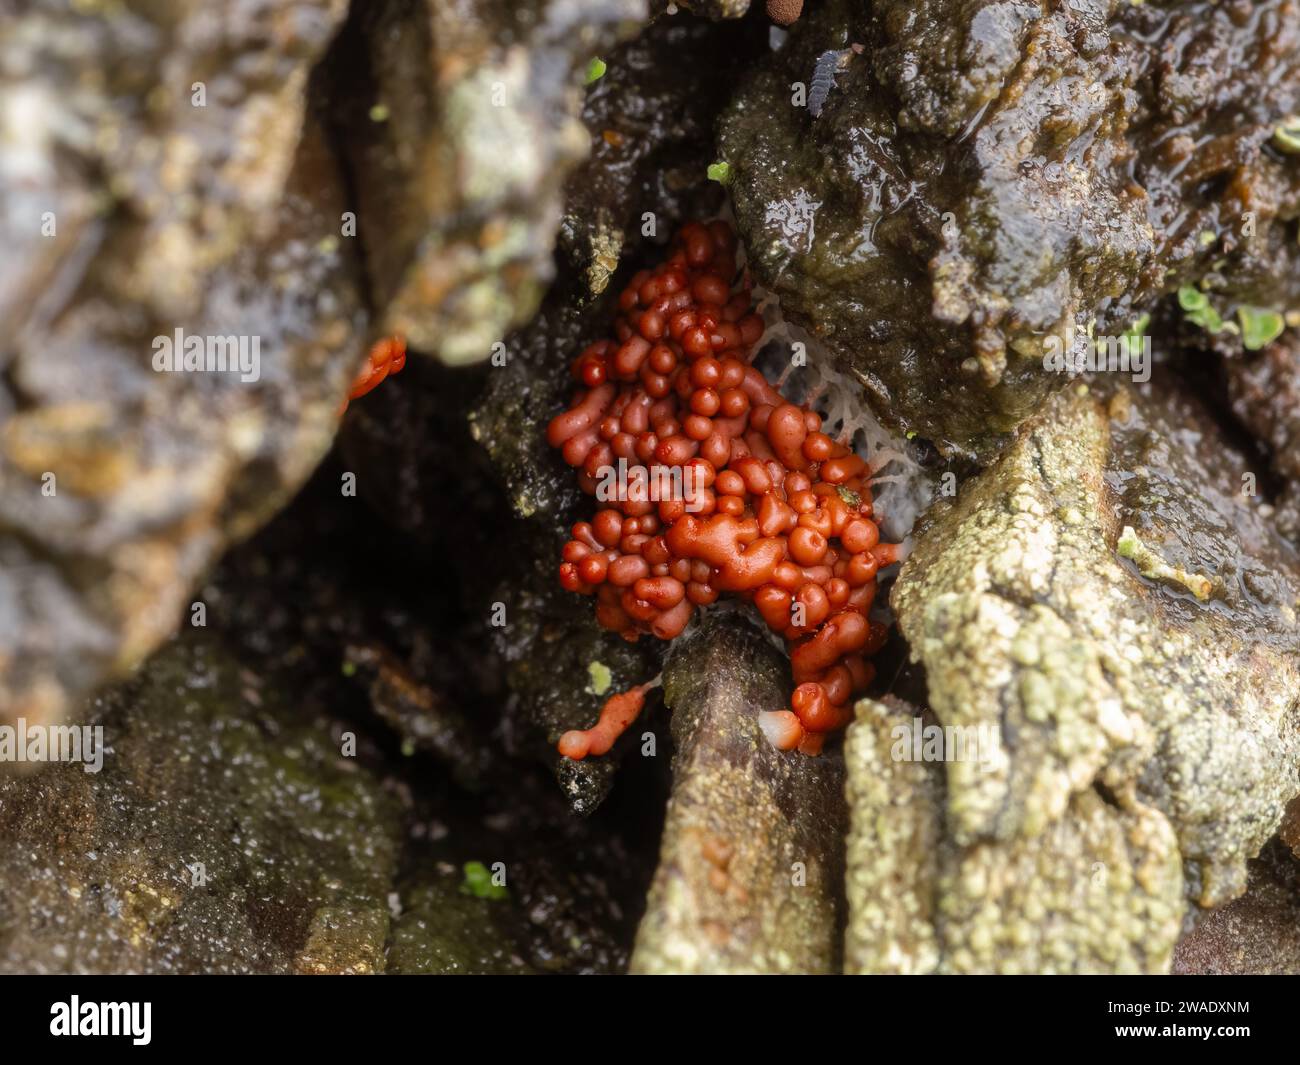 Close-up image of the fruiting body of a red slime mould or slime mold (Arcyria species) formed in a crevice in a rotting log Stock Photo